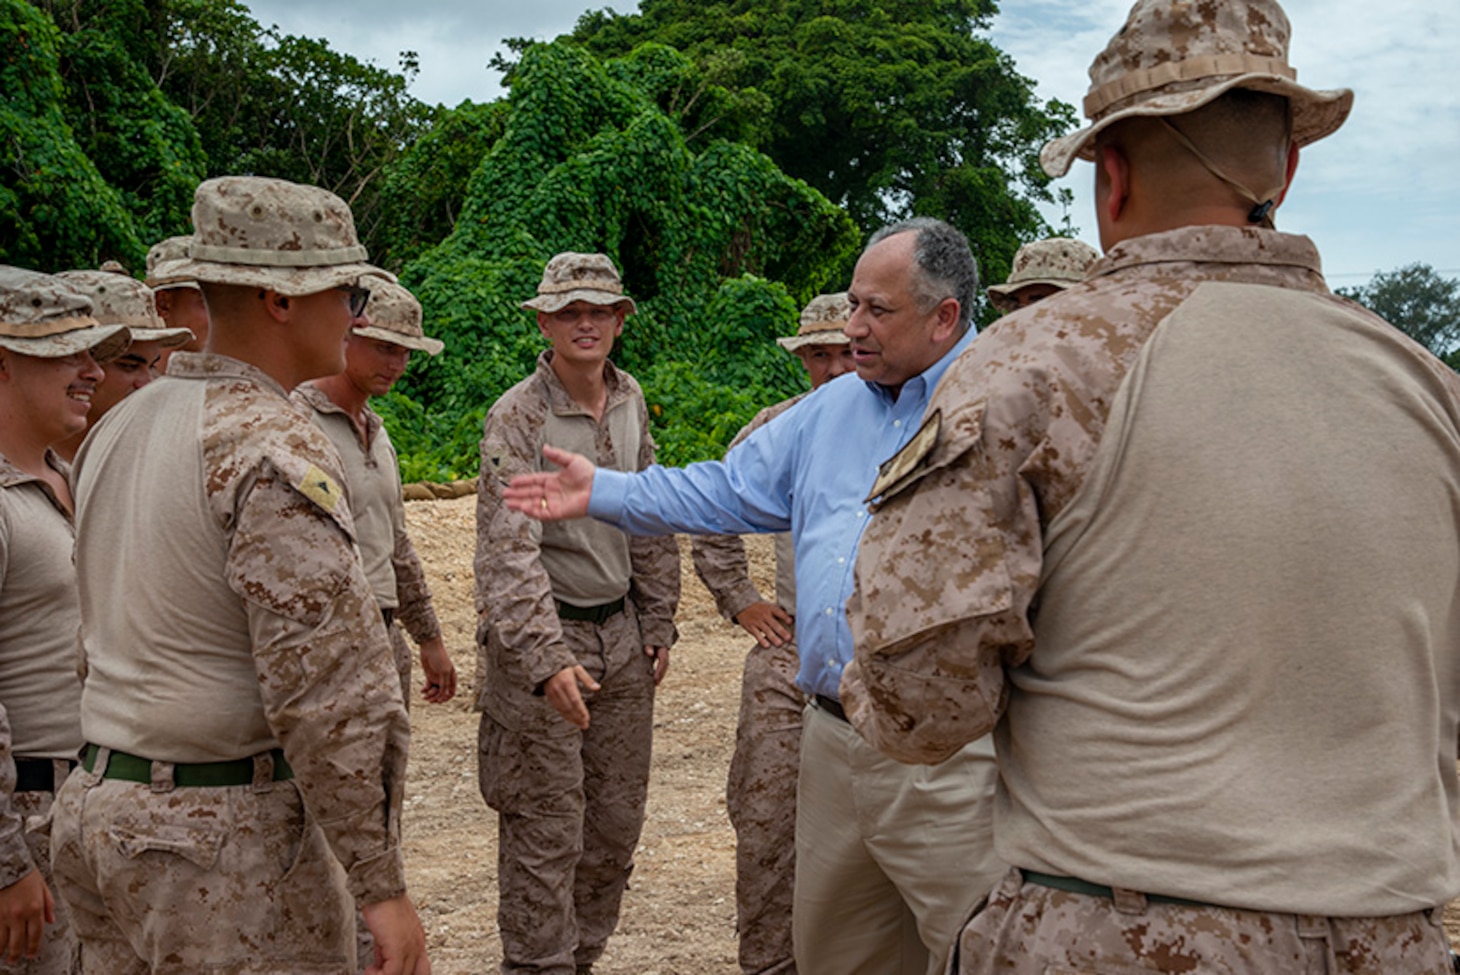 PELELIU, Republic of Palau (March 1, 2024) –Secretary of the Navy Carlos Del Toro receives a tour of ongoing construction at the Peleliu Airfield from Marines of the 1 st Marine Logistics Group, March 1. Secretary Del Toro’s visit to Palau is part of a series of strategic engagements in the Indo-
Pacific to promote the protection of the maritime commons in line with his Maritime Statecraft efforts. (U.S. Navy photo by Shaina O’Neal)